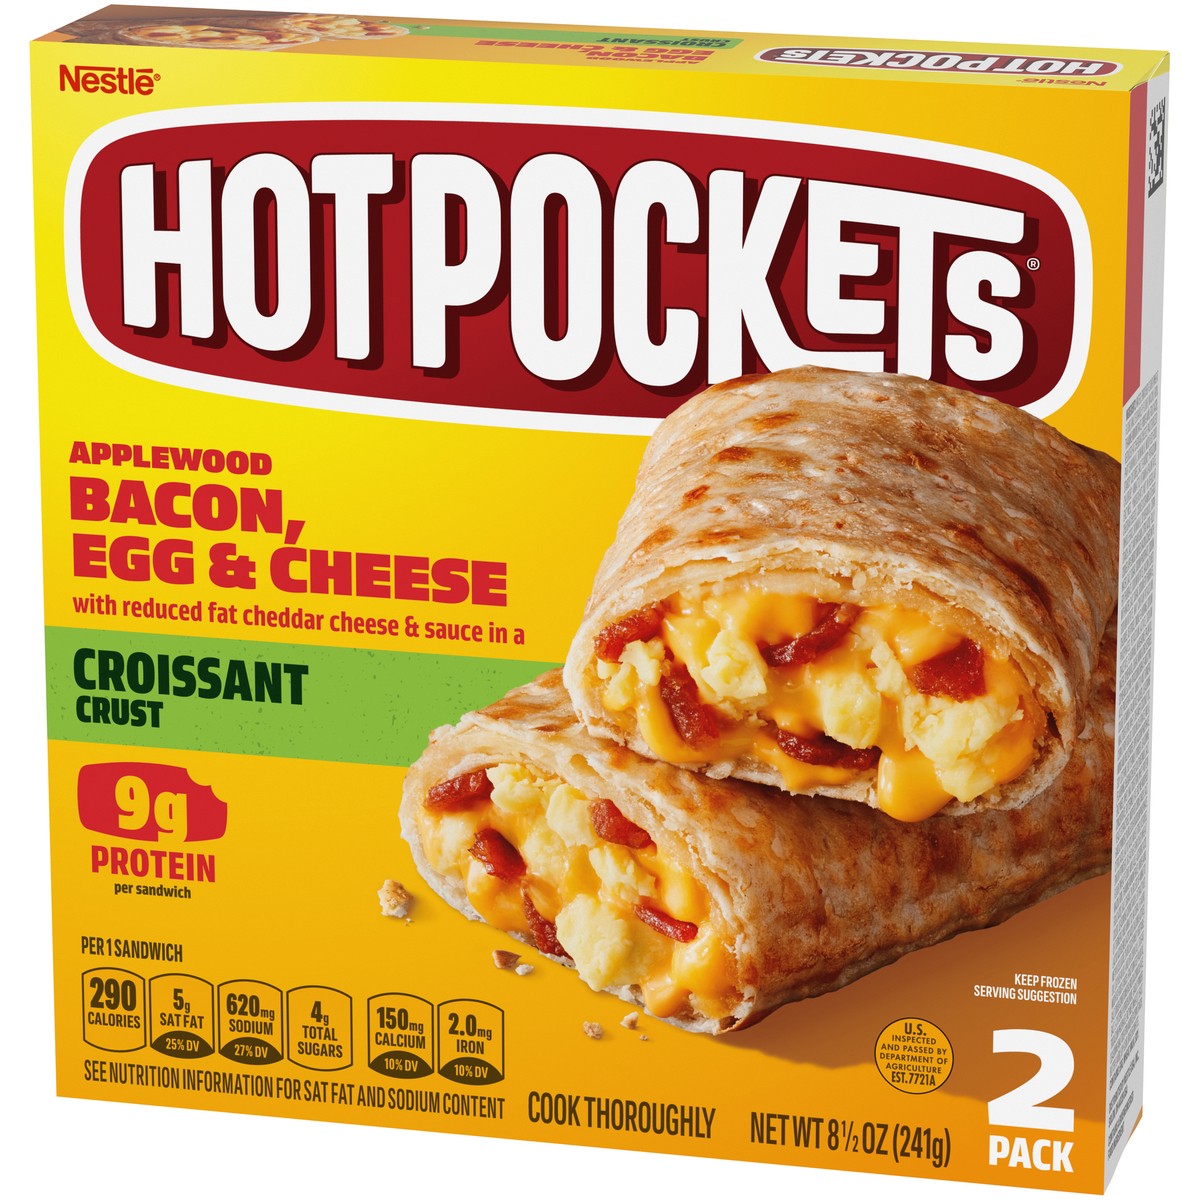 slide 3 of 9, Hot Pockets Applewood Bacon, Egg & Cheese Croissant Crust Frozen Breakfast Sandwiches, Breakfast Hot Pockets Made with Cheddar Cheese, 2 Count, 8.5 oz